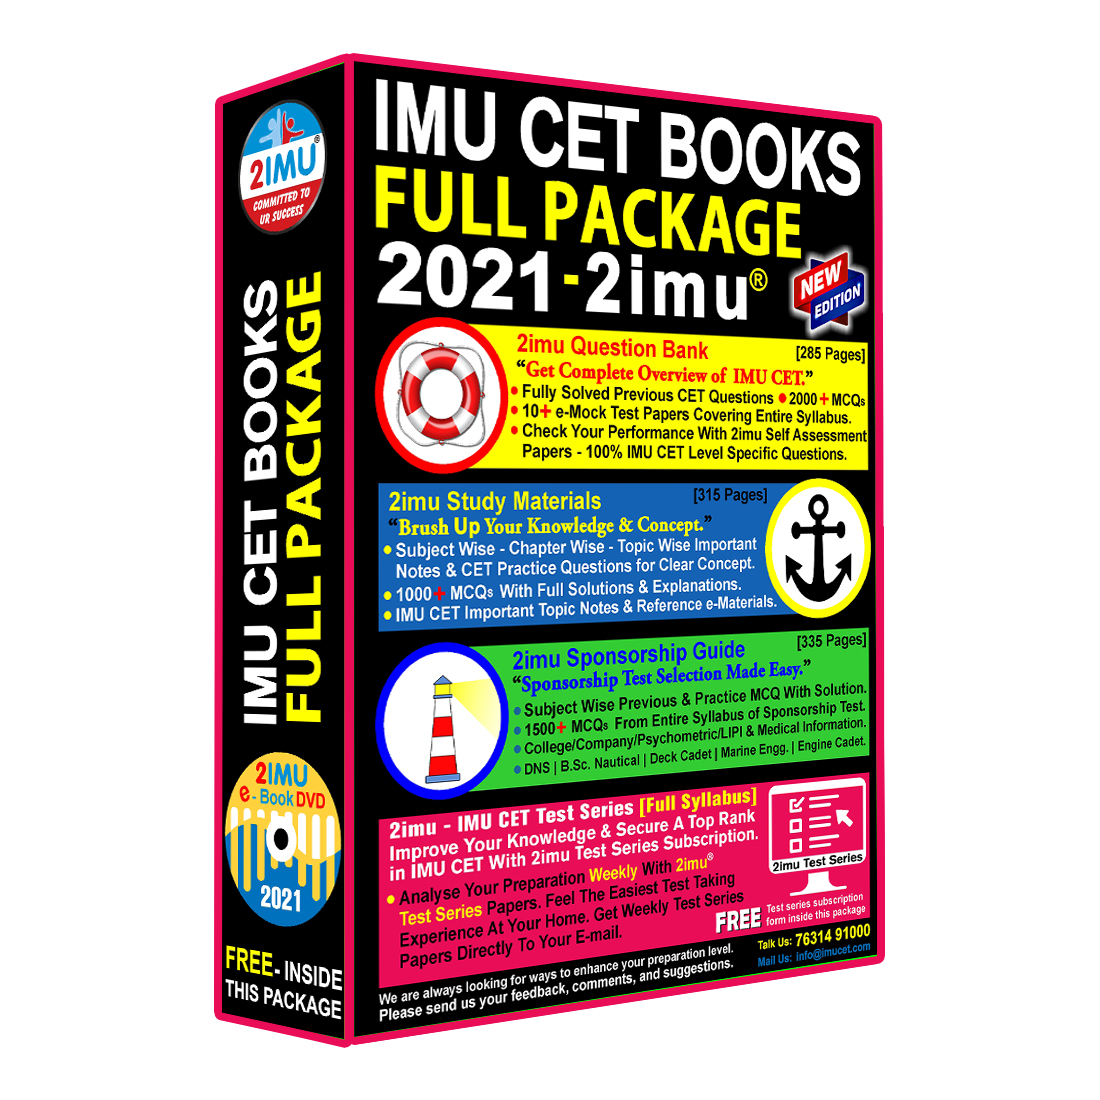 IMUCET BOOKS 2020 Full Package